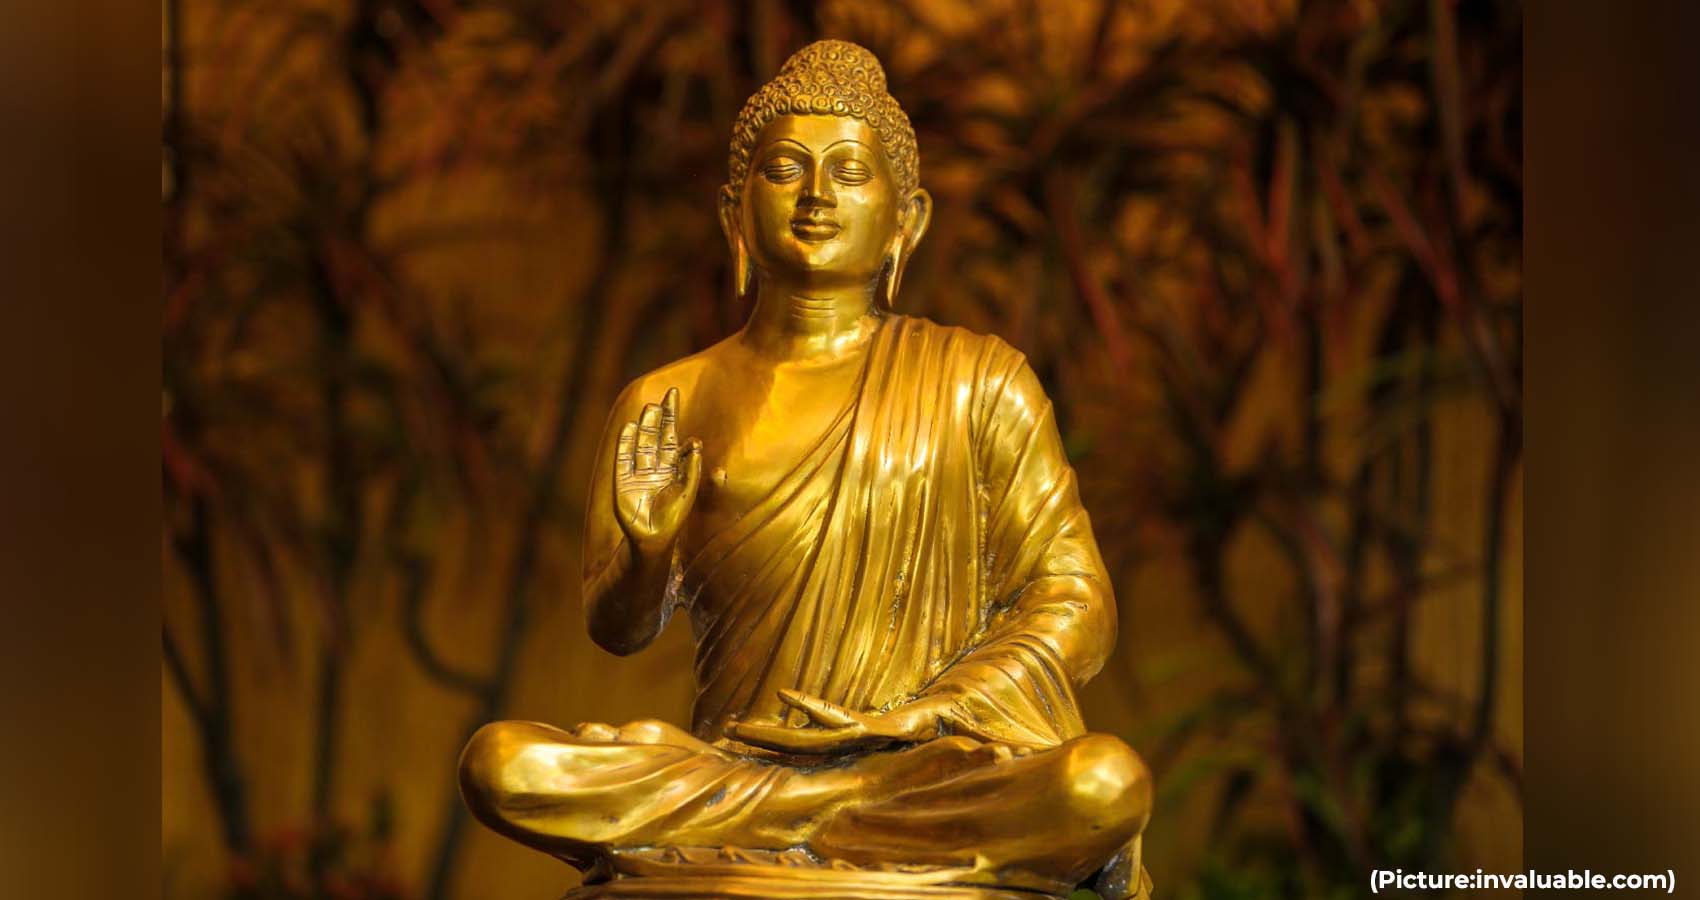 India Is Committed To Spread Teachings Of Buddha Across World